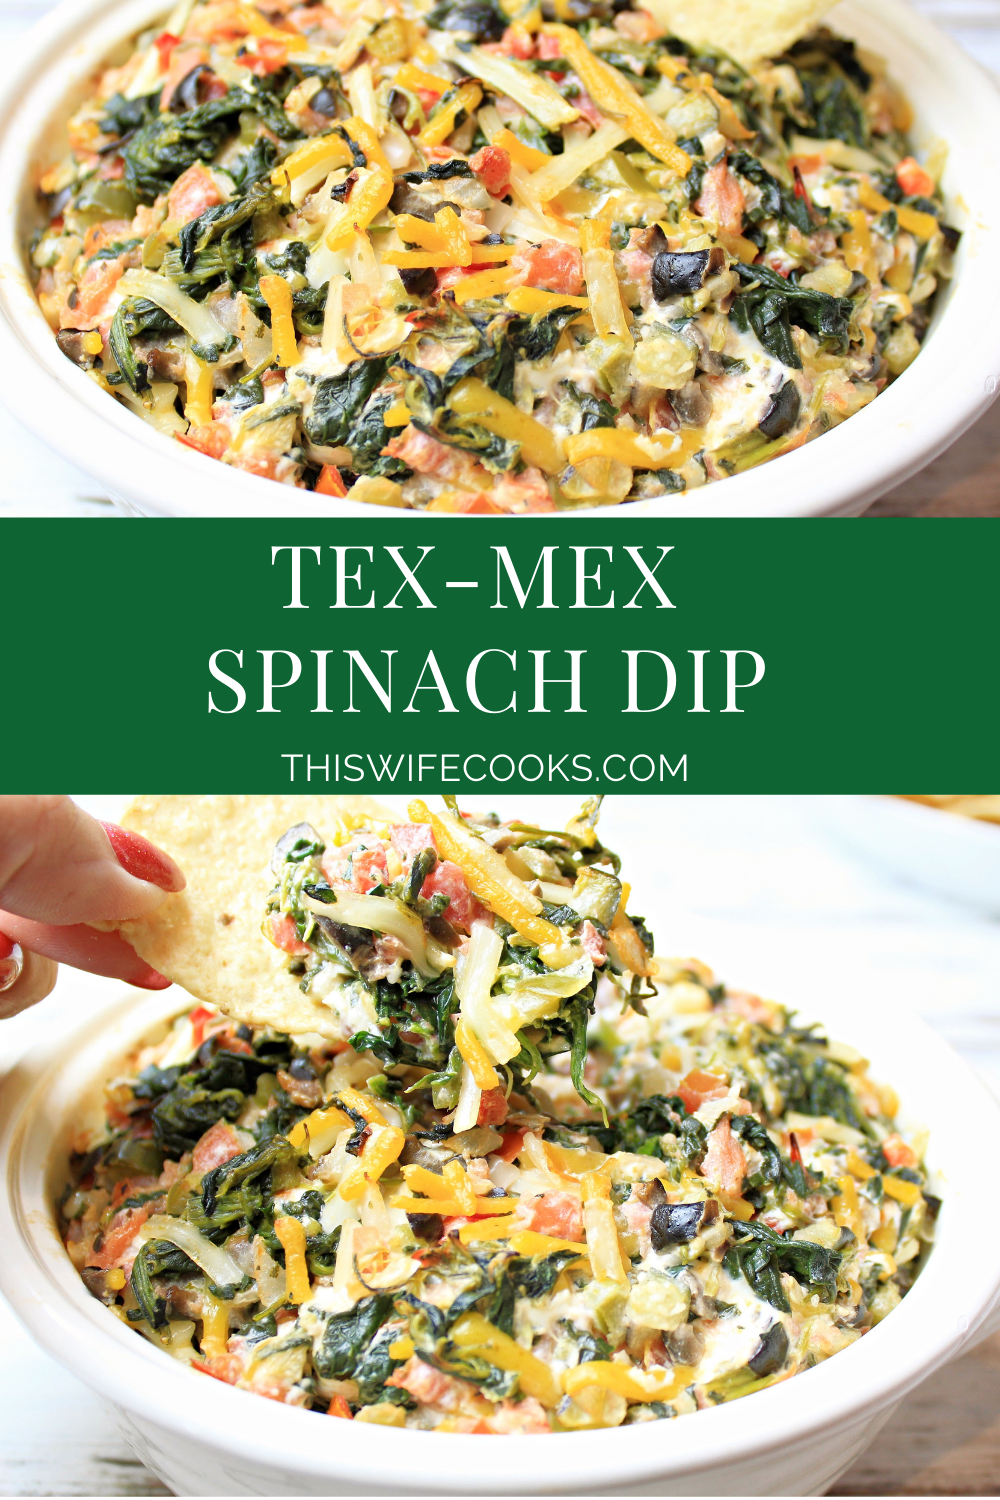 Tex-Mex Spinach Dip ~ 

This warm spinach dip is a kicked up version of the classic appetizer and party food! via @thiswifecooks